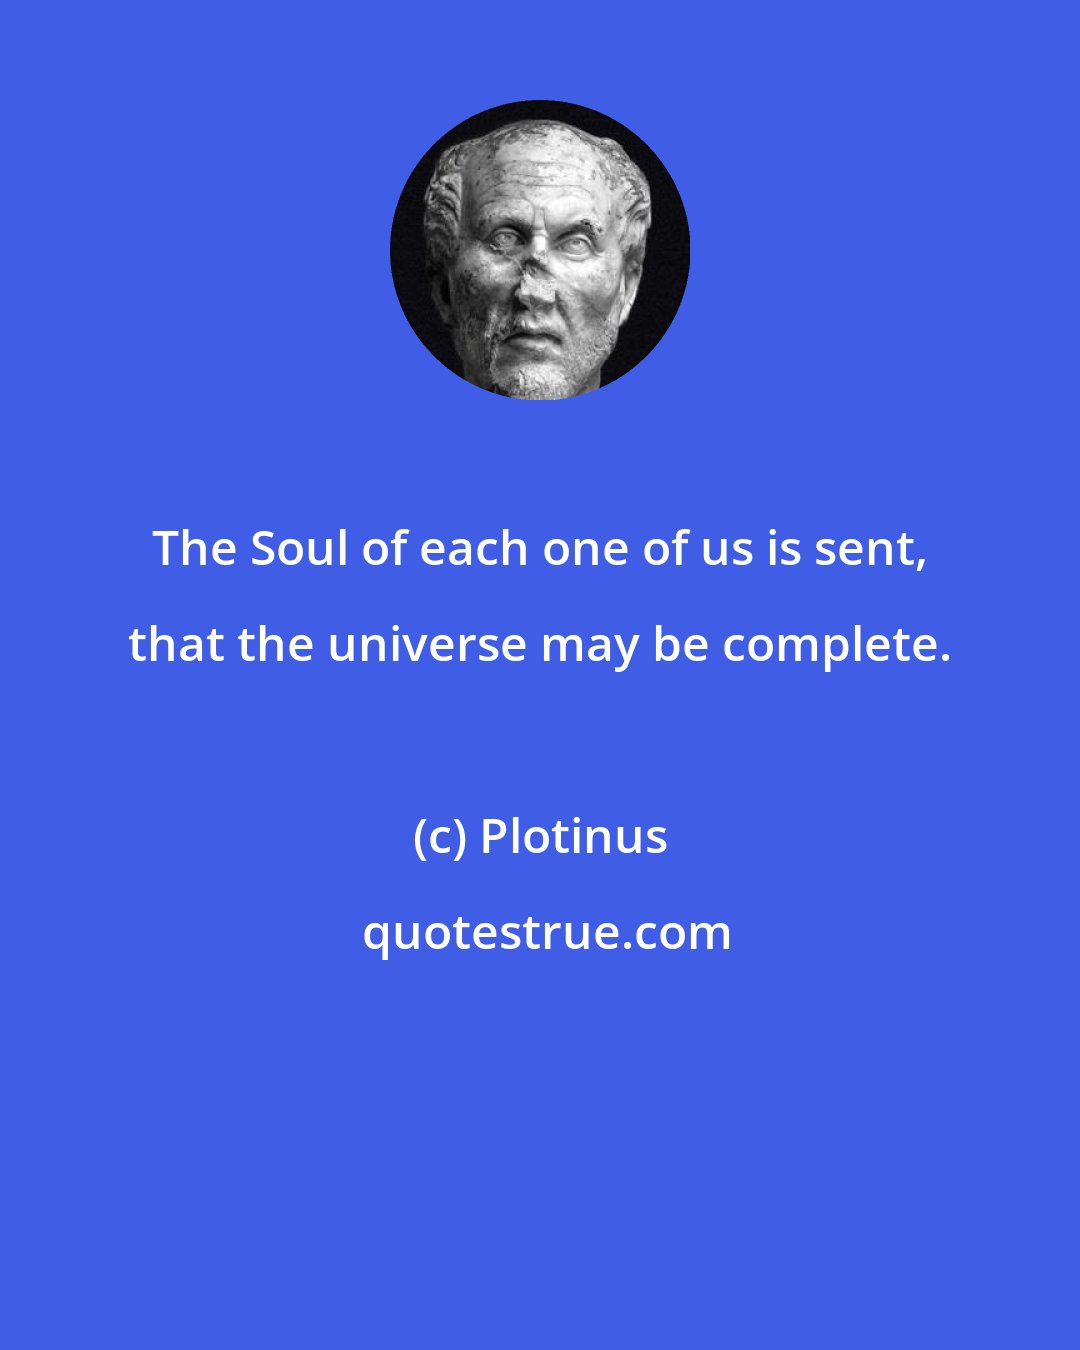 Plotinus: The Soul of each one of us is sent, that the universe may be complete.